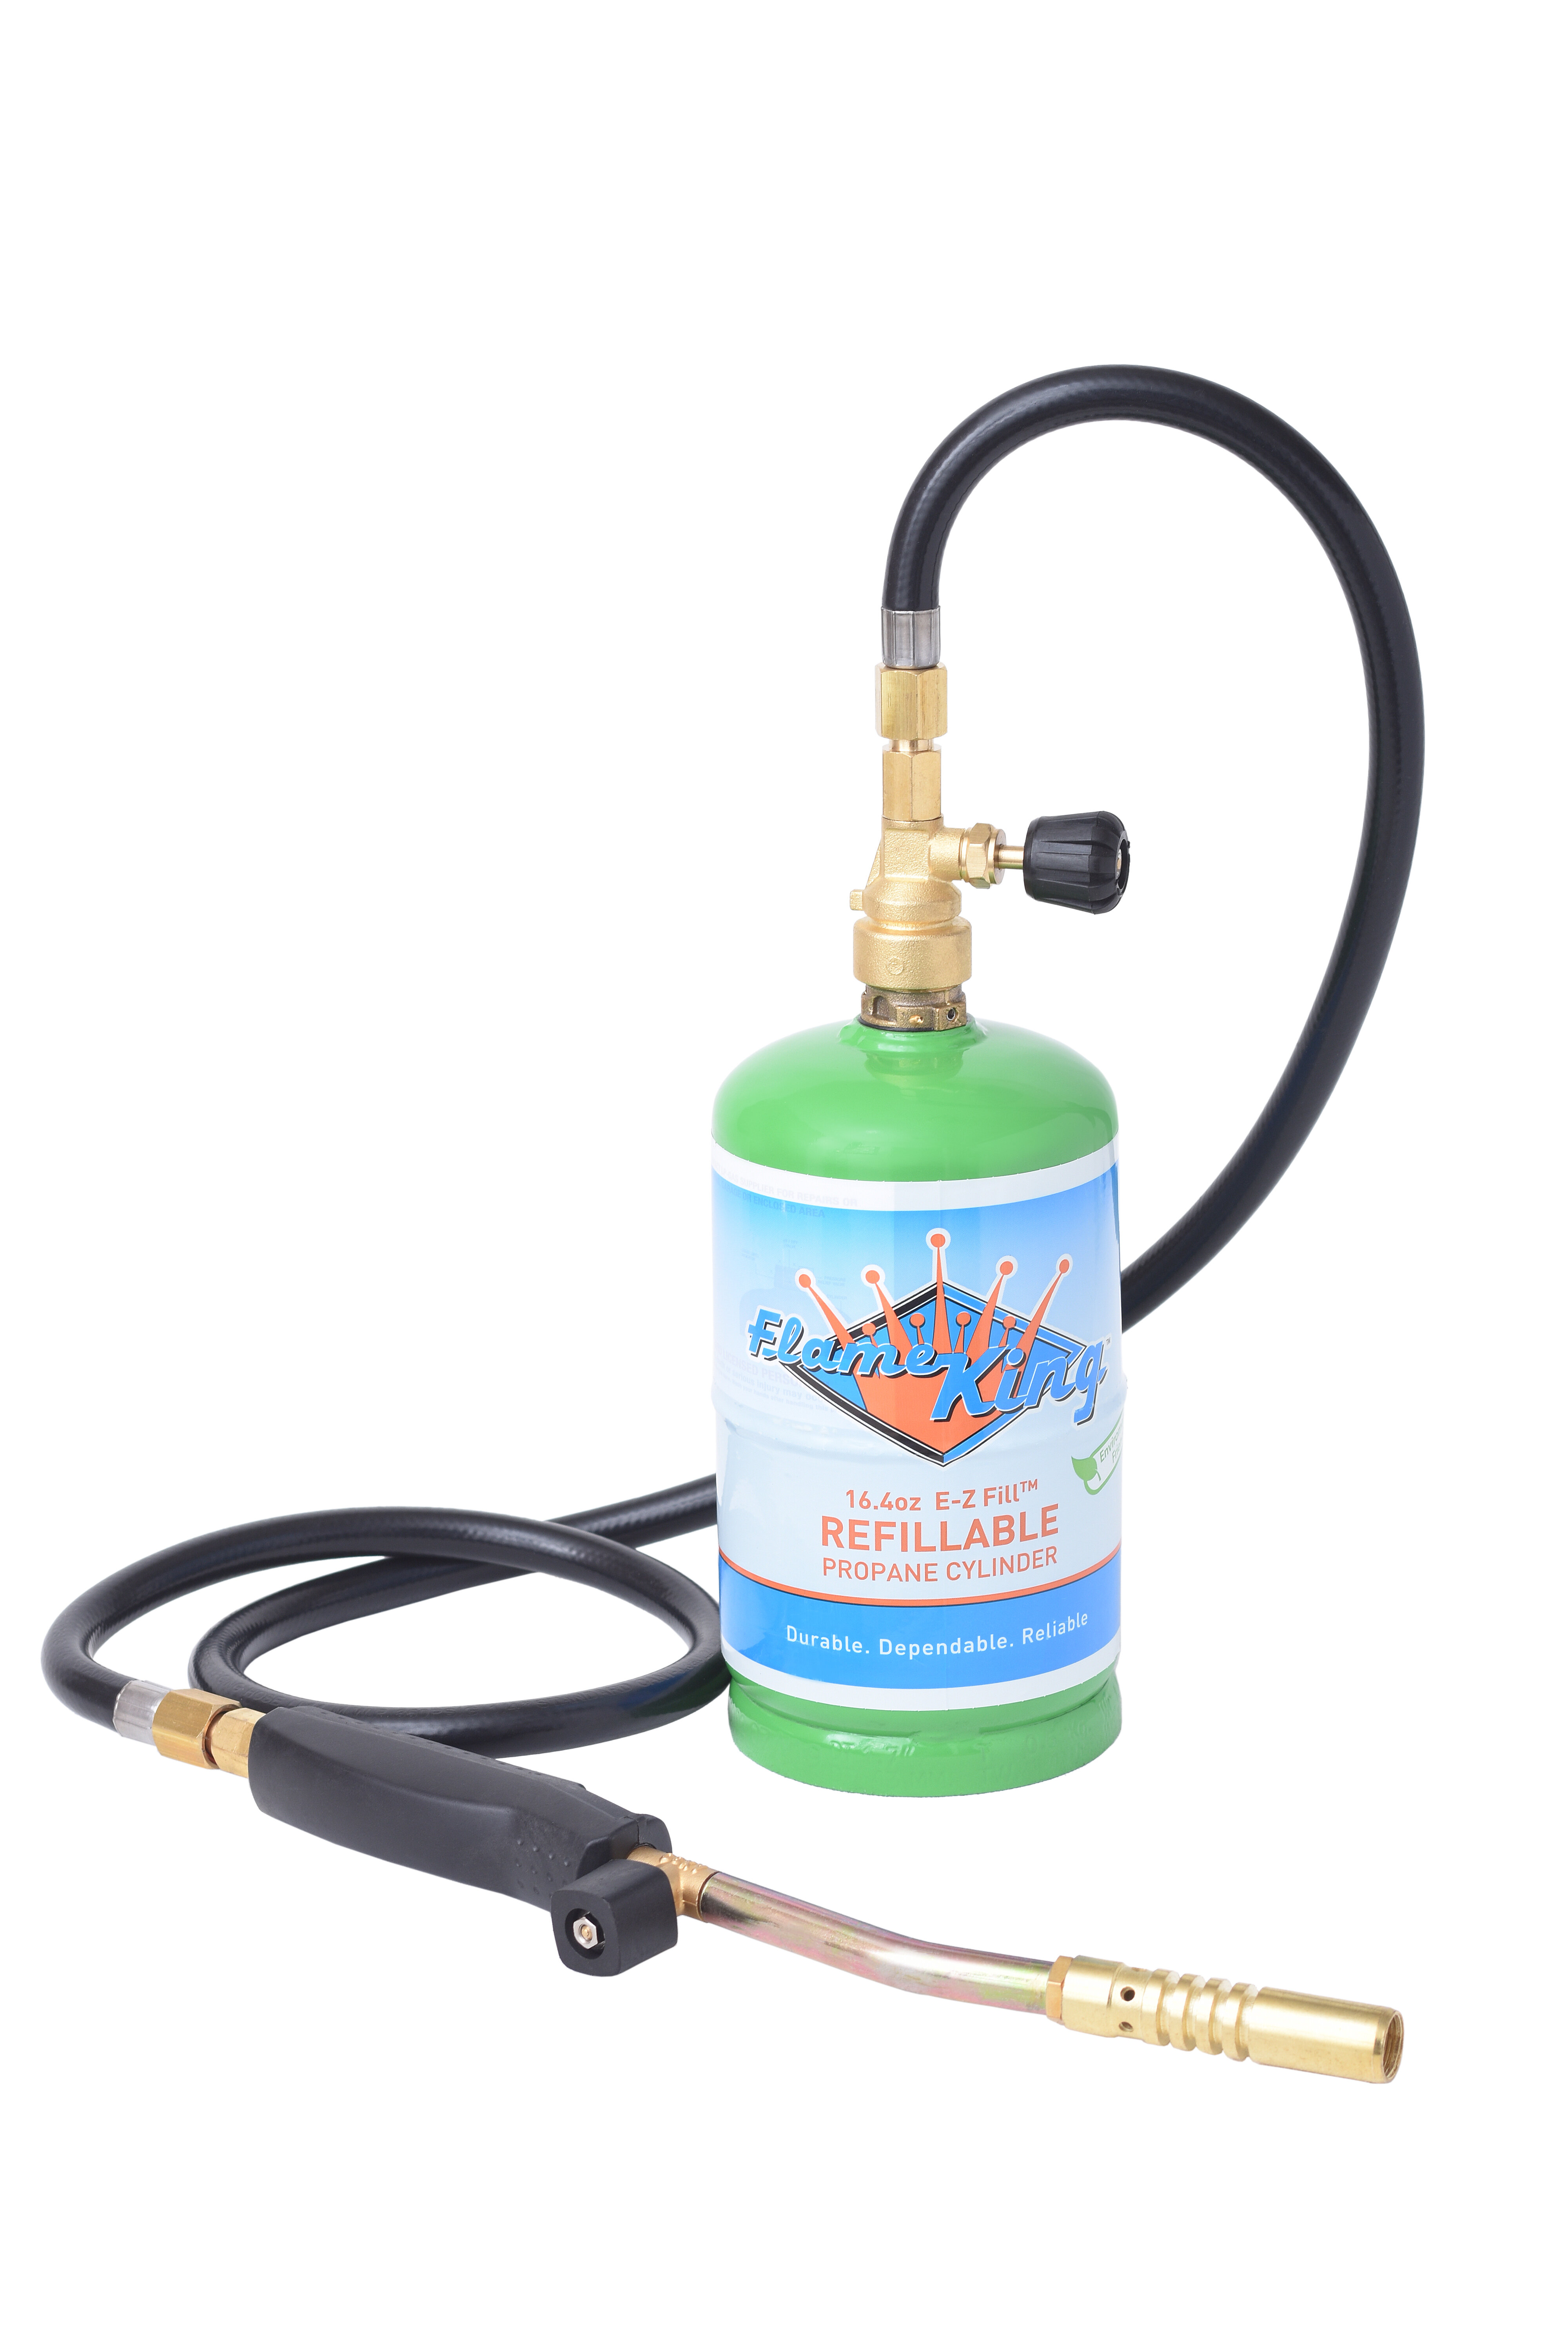 Portable Propane Torch Burner Fire Starter Industrial Heating Torch Ice Melting with 3 Nozzles and Hose